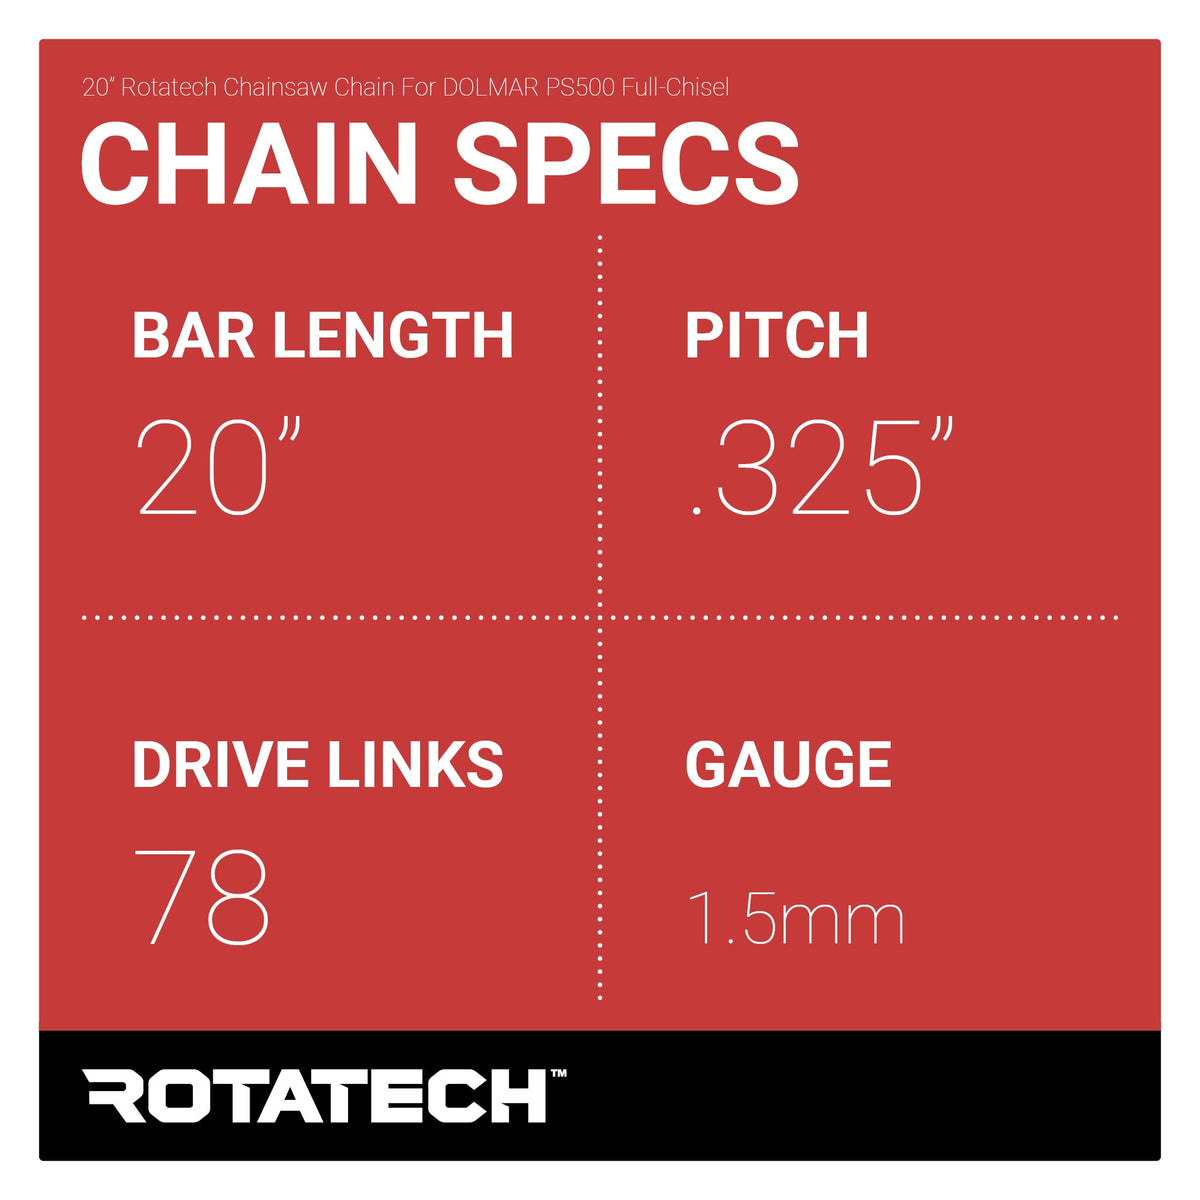 20" Rotatech Chainsaw Chain For DOLMAR PS500 Full-Chisel Chain Specs